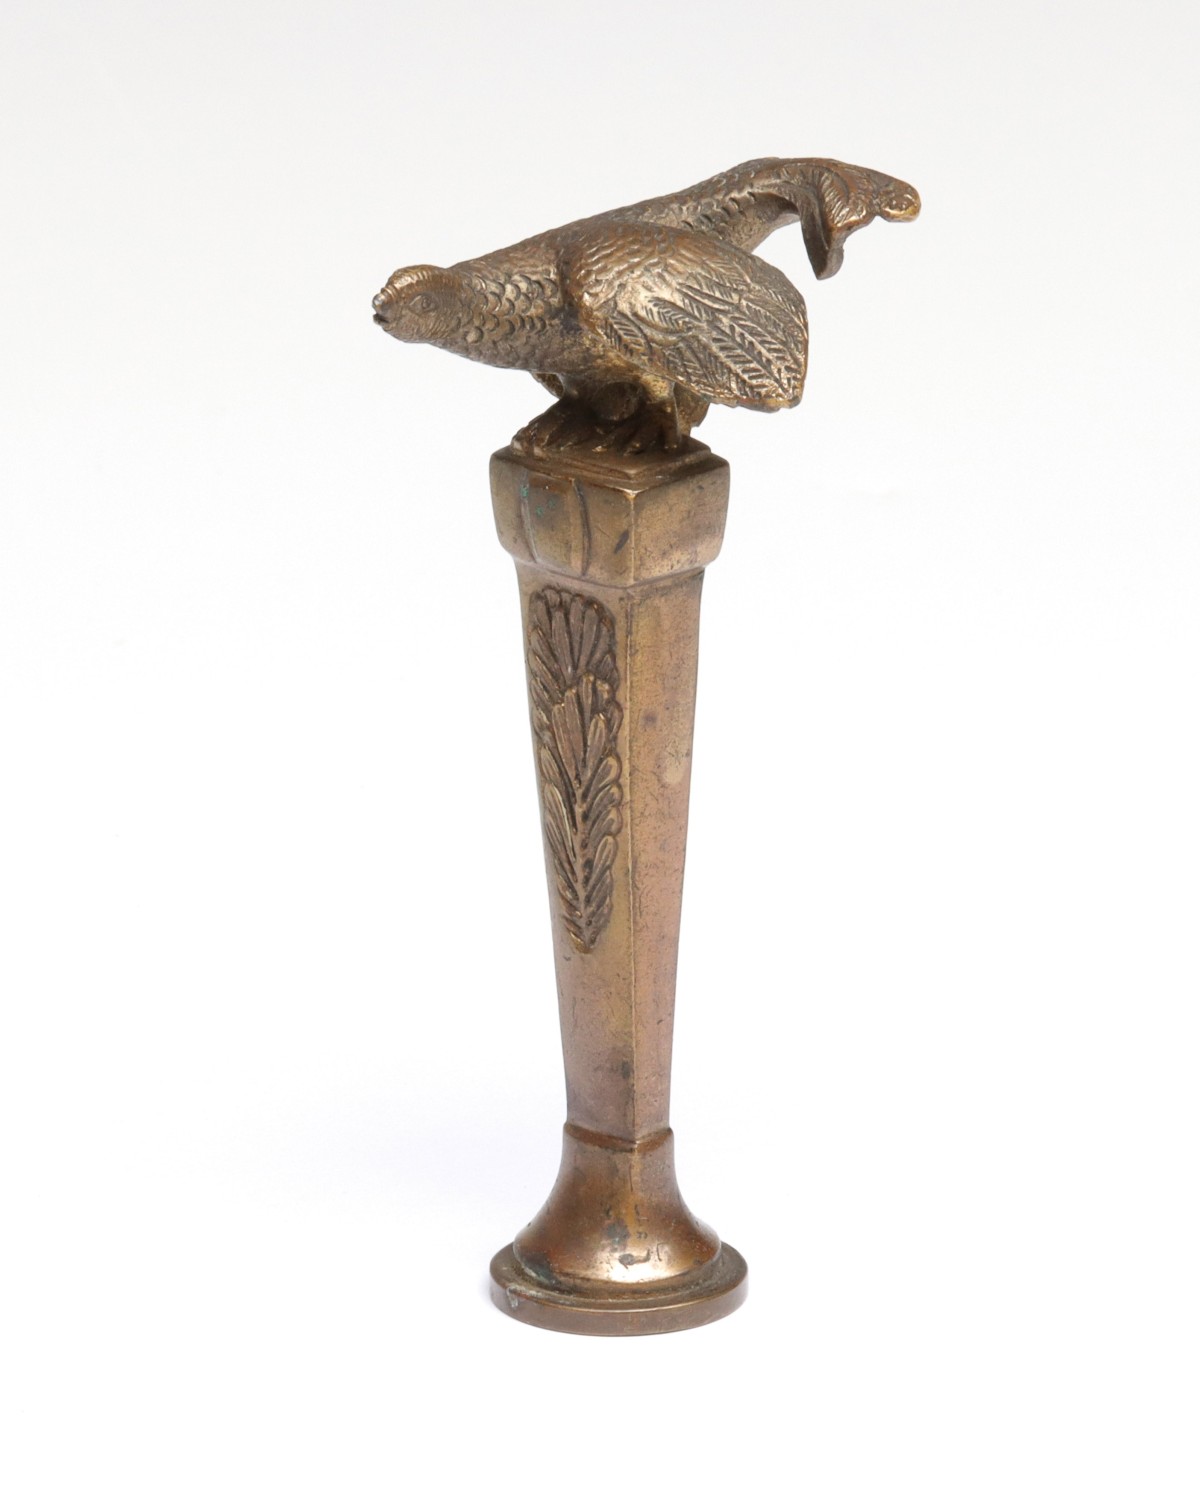 BRONZE GROUSE FIGURAL WAX SEAL C. 1900